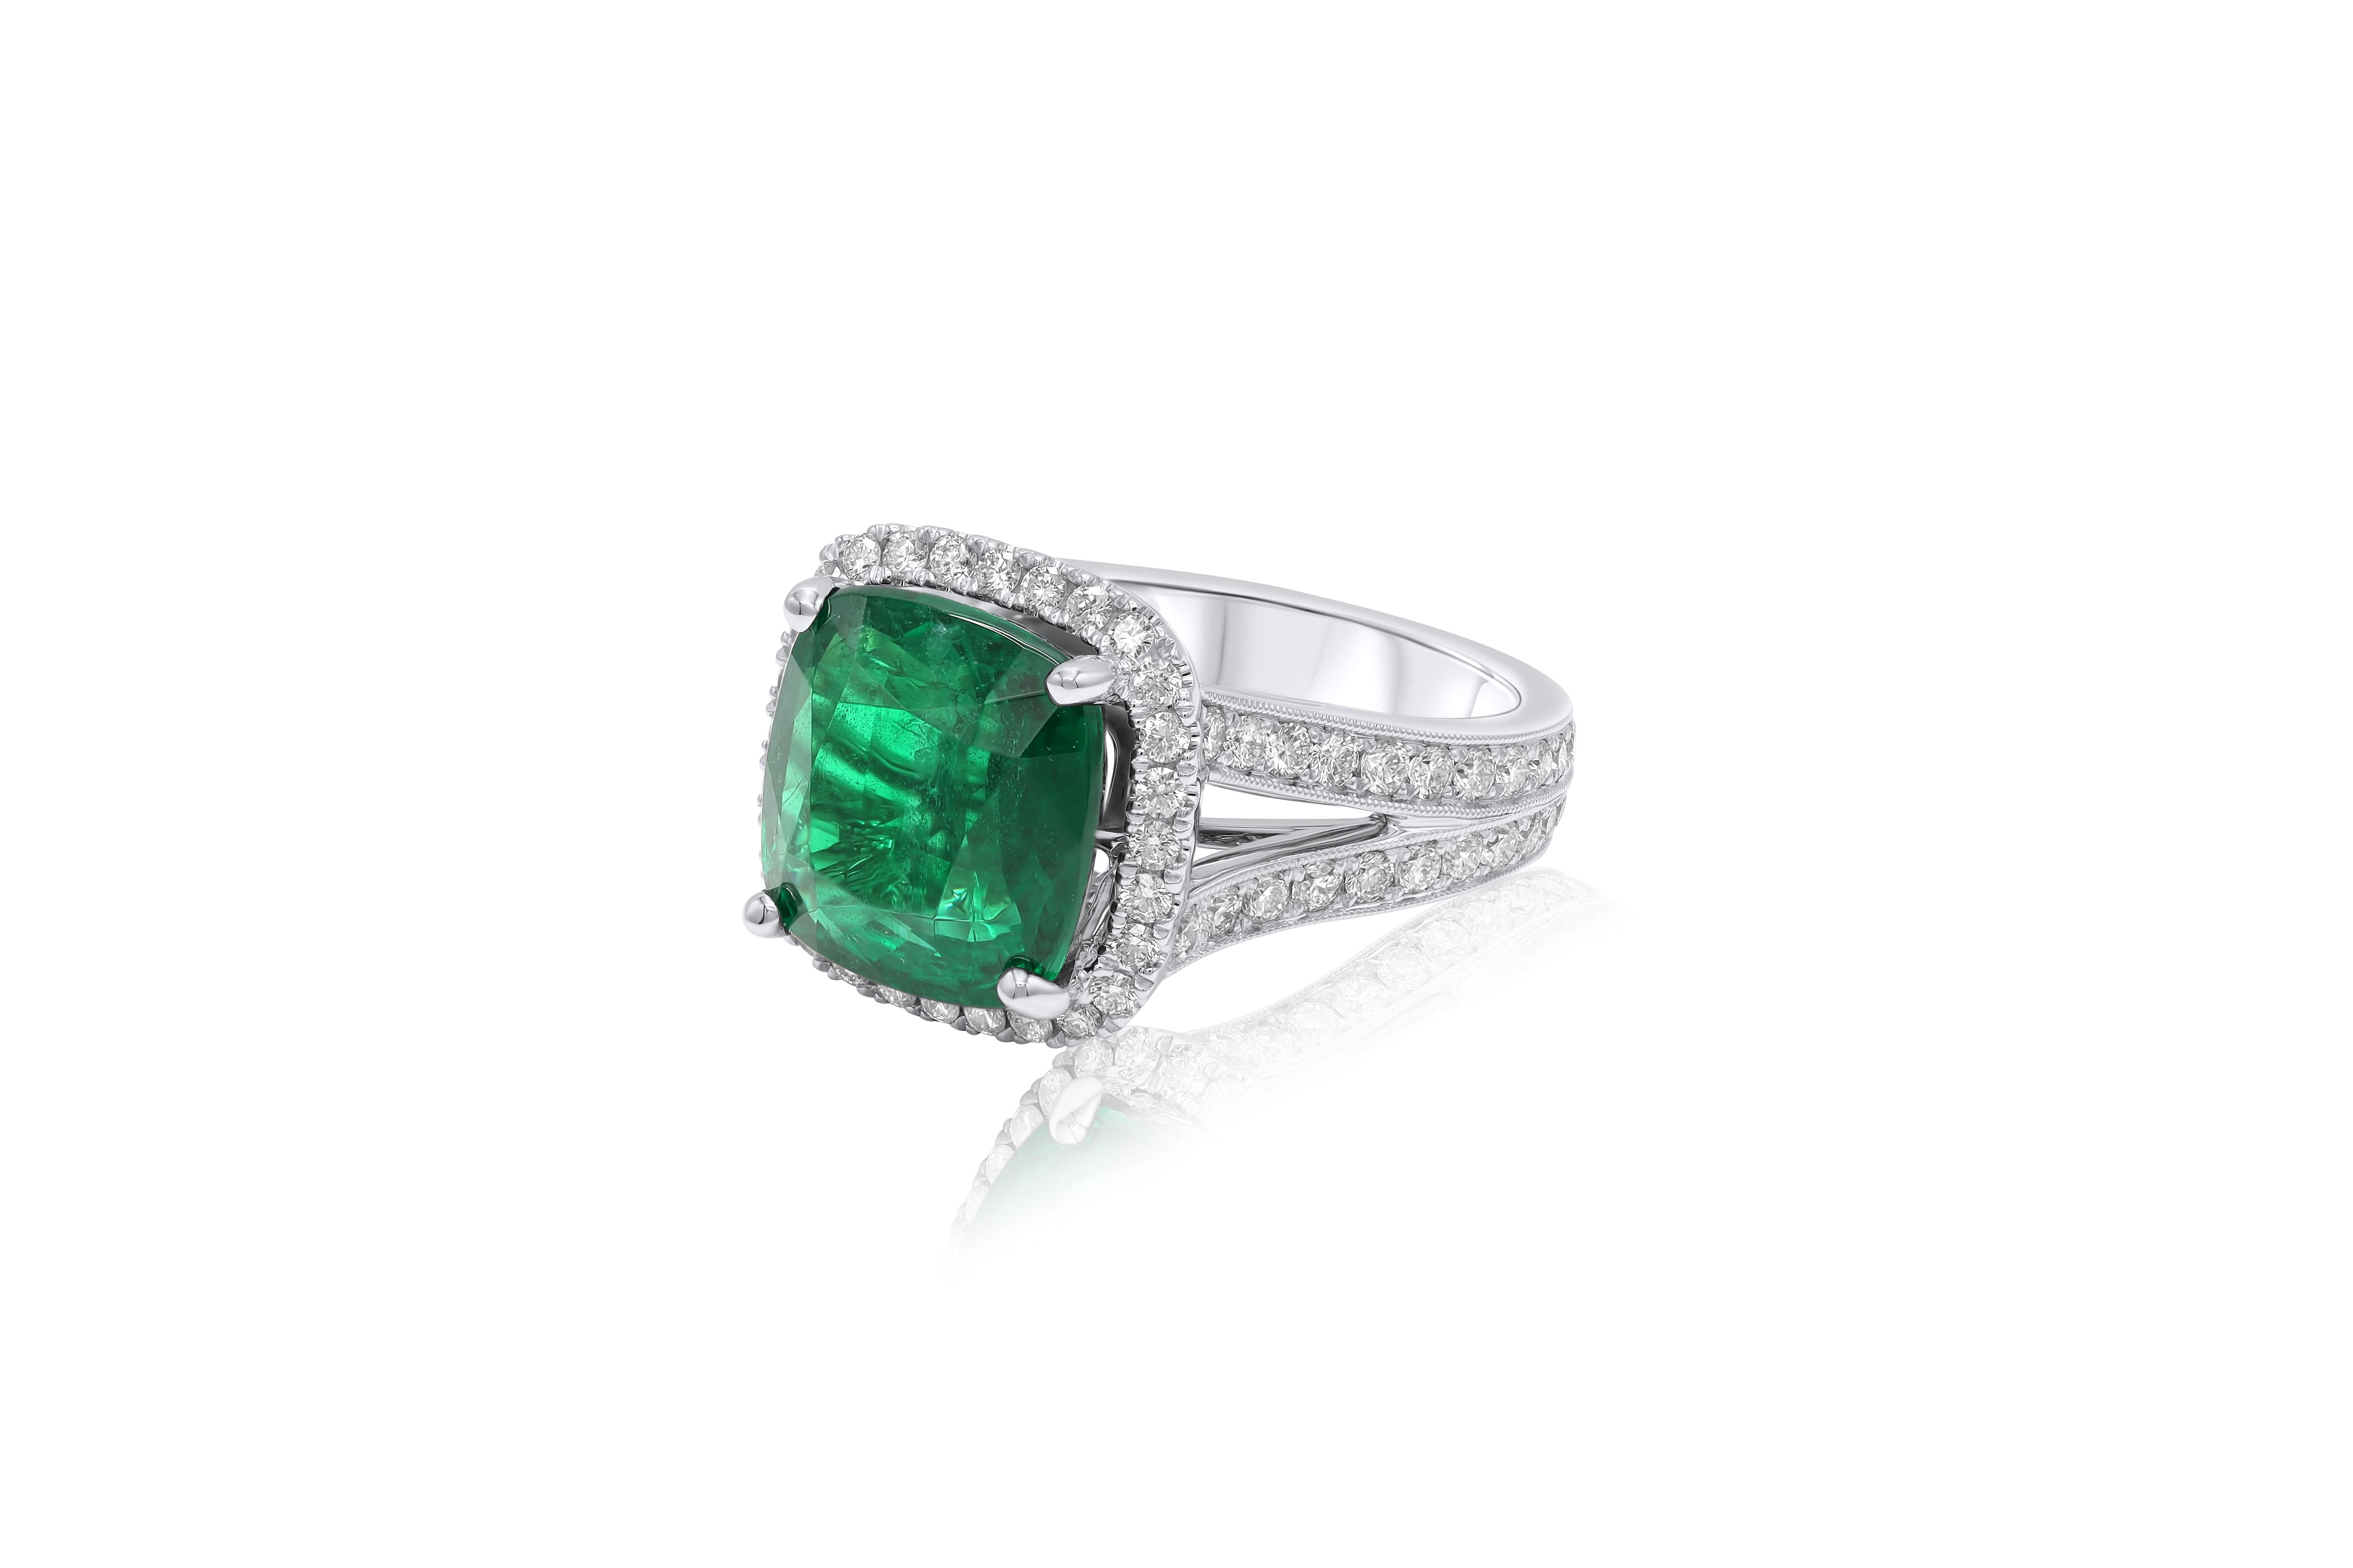 Modern Diana M. 18 kt white gold emerald diamond ring featuring a 6.63 ct  For Sale